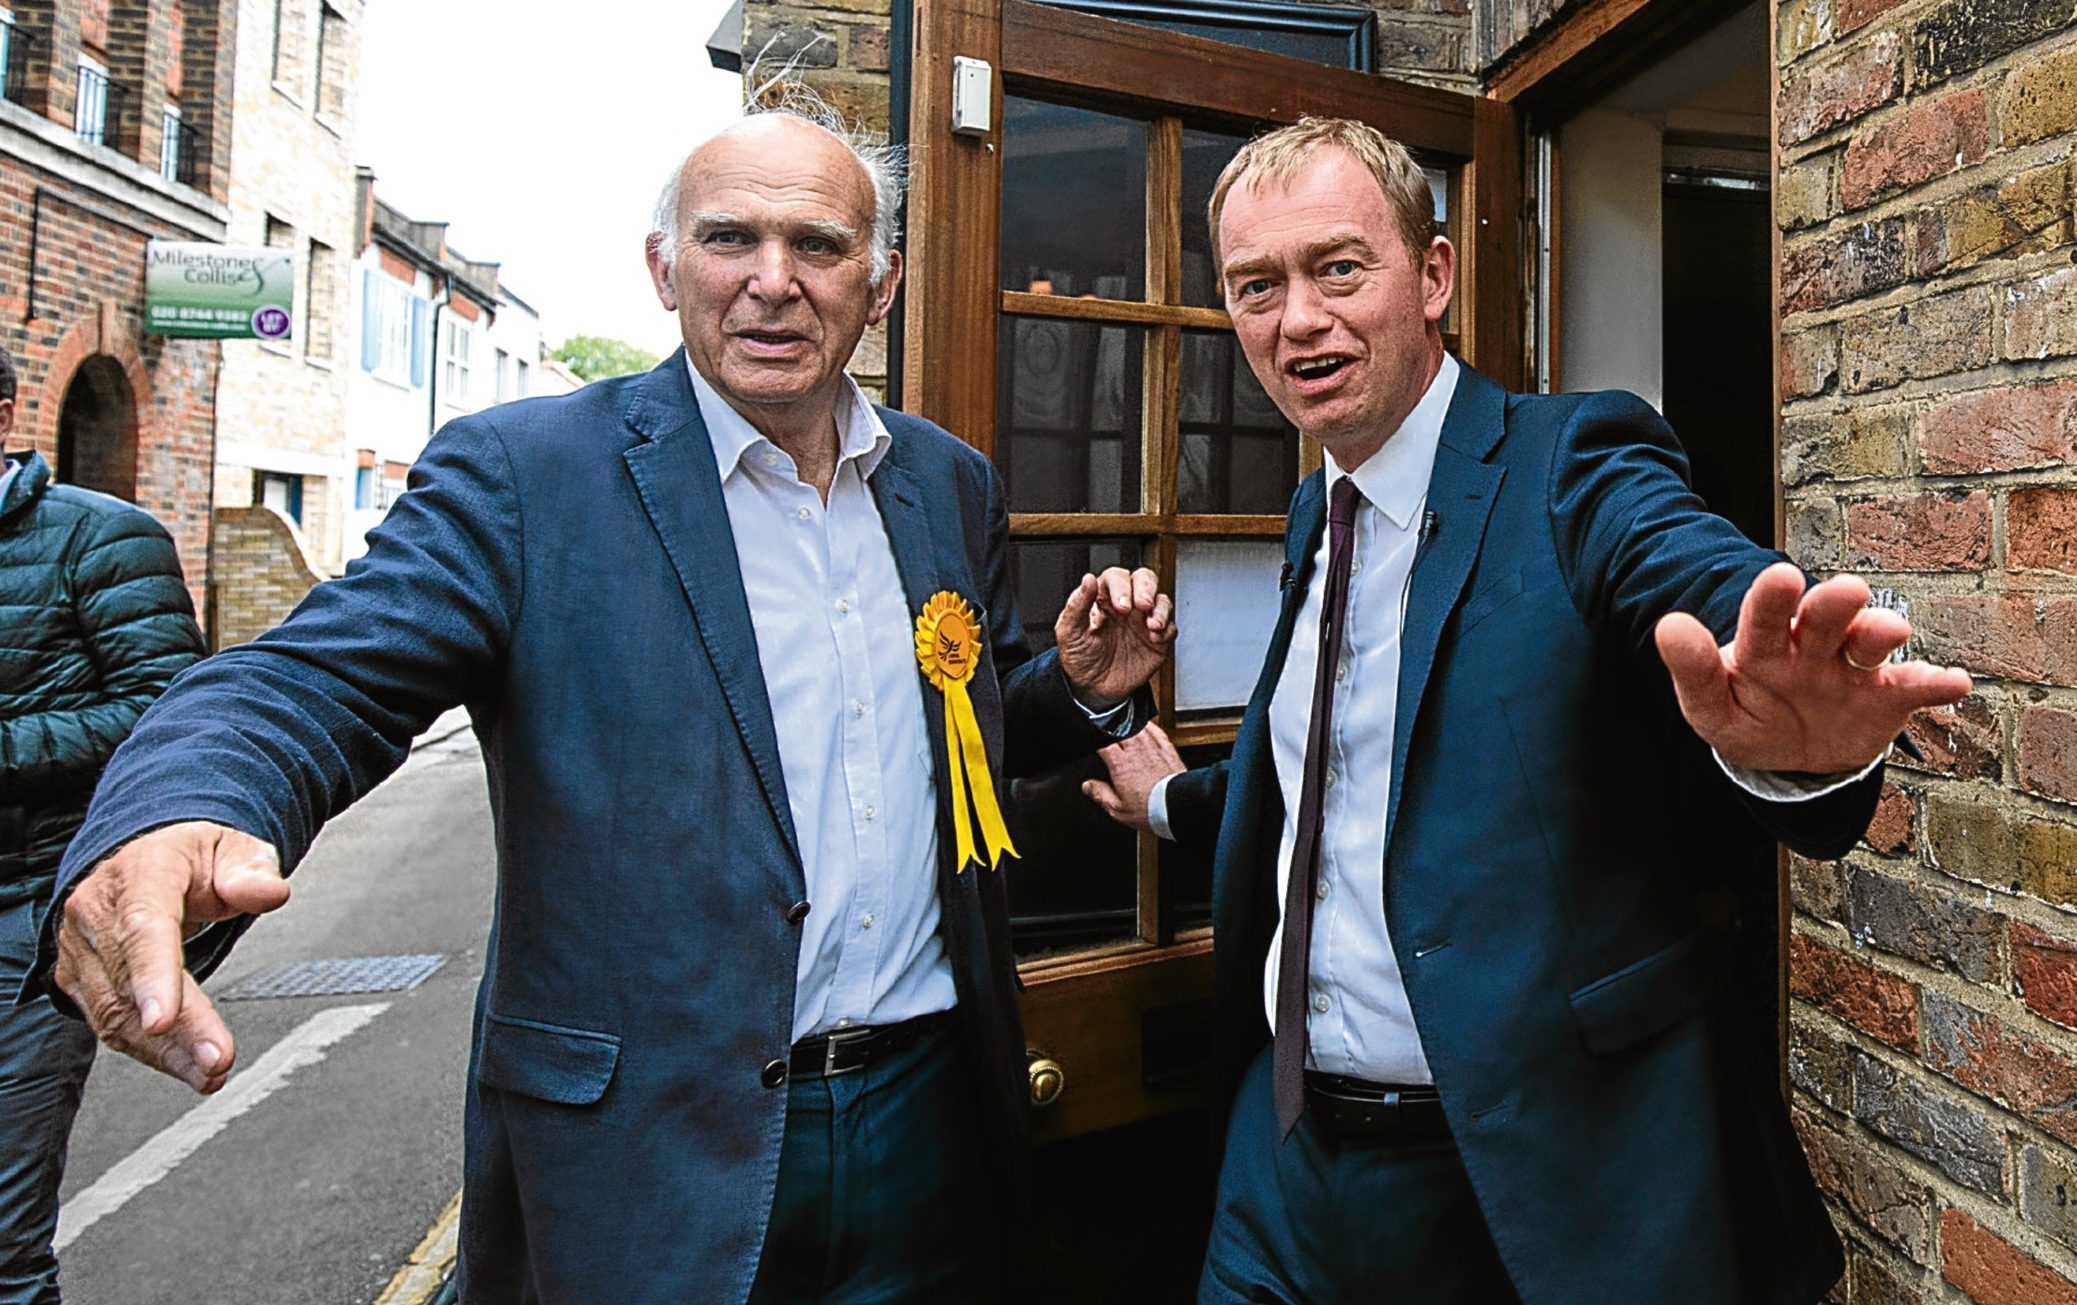 Vince Cable and Tim Farron campaigning during the General Election.